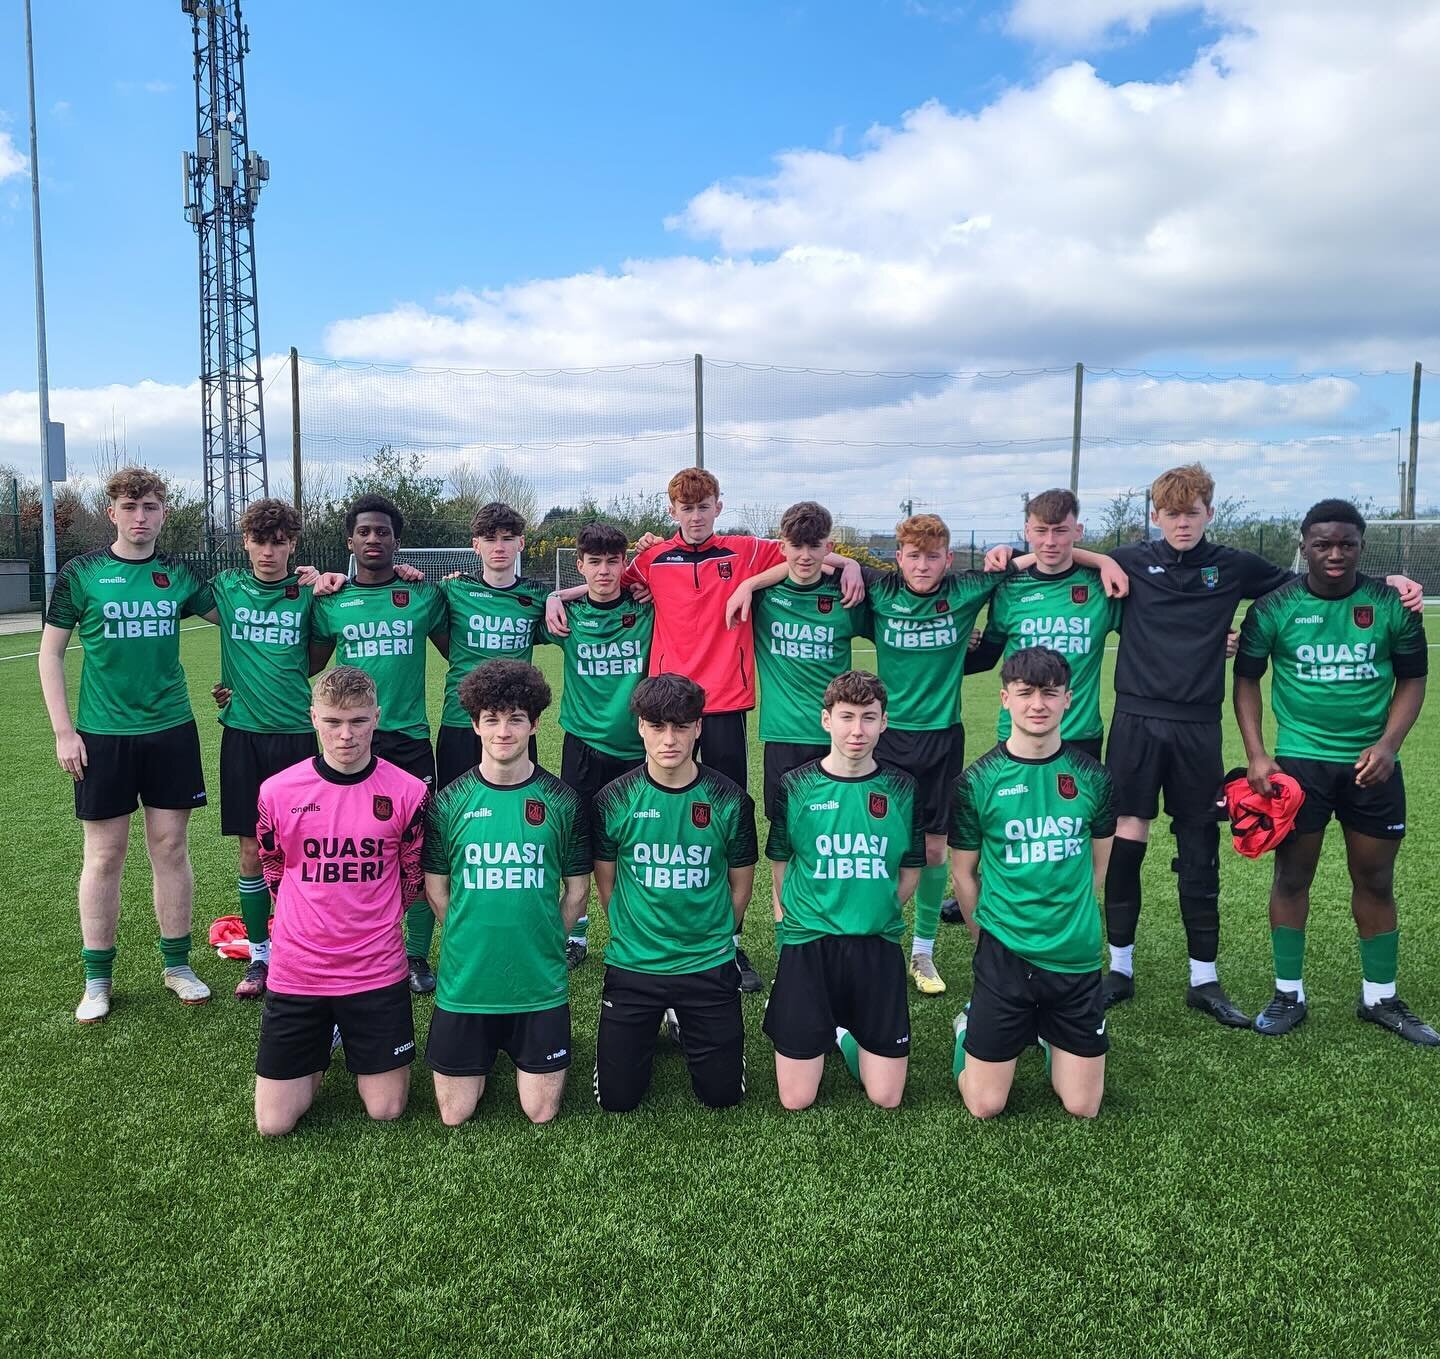 Hard Luck to our U17 Boys Soccer Team, who were unlucky in their Cork Schools Cup Quarter Final against Glanmire Community College last week! 💪 Few chances for the Passage side resulted in a 5-1 scoreline, with Liam Quinn (C) scoring following a won